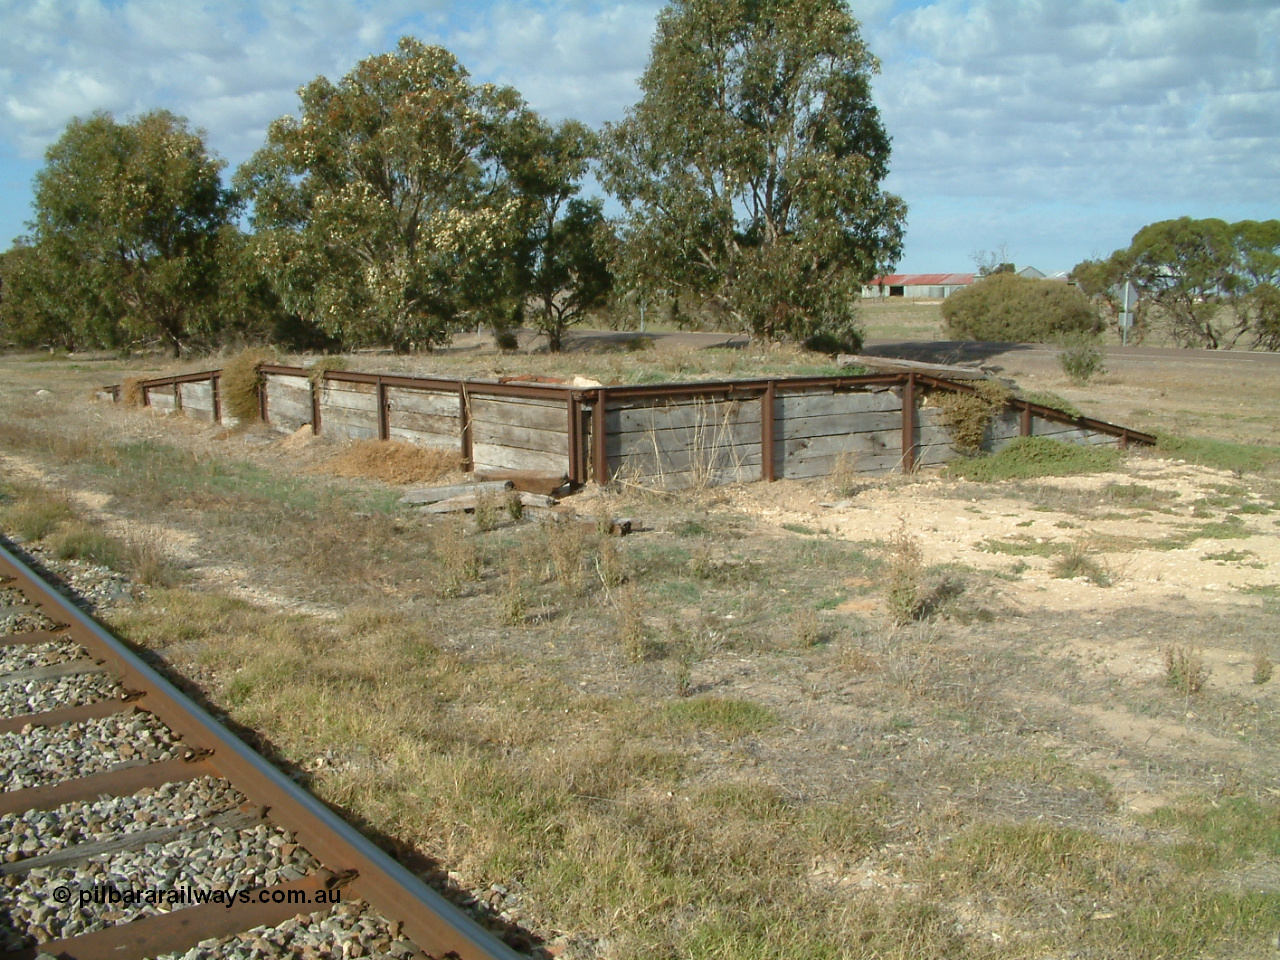 030406 090159
Karkoo, station located at 93.6 km, originally opened February 1914 and closed in August 1980, this former loading ramp being all that remains today, 6th April 2003.
